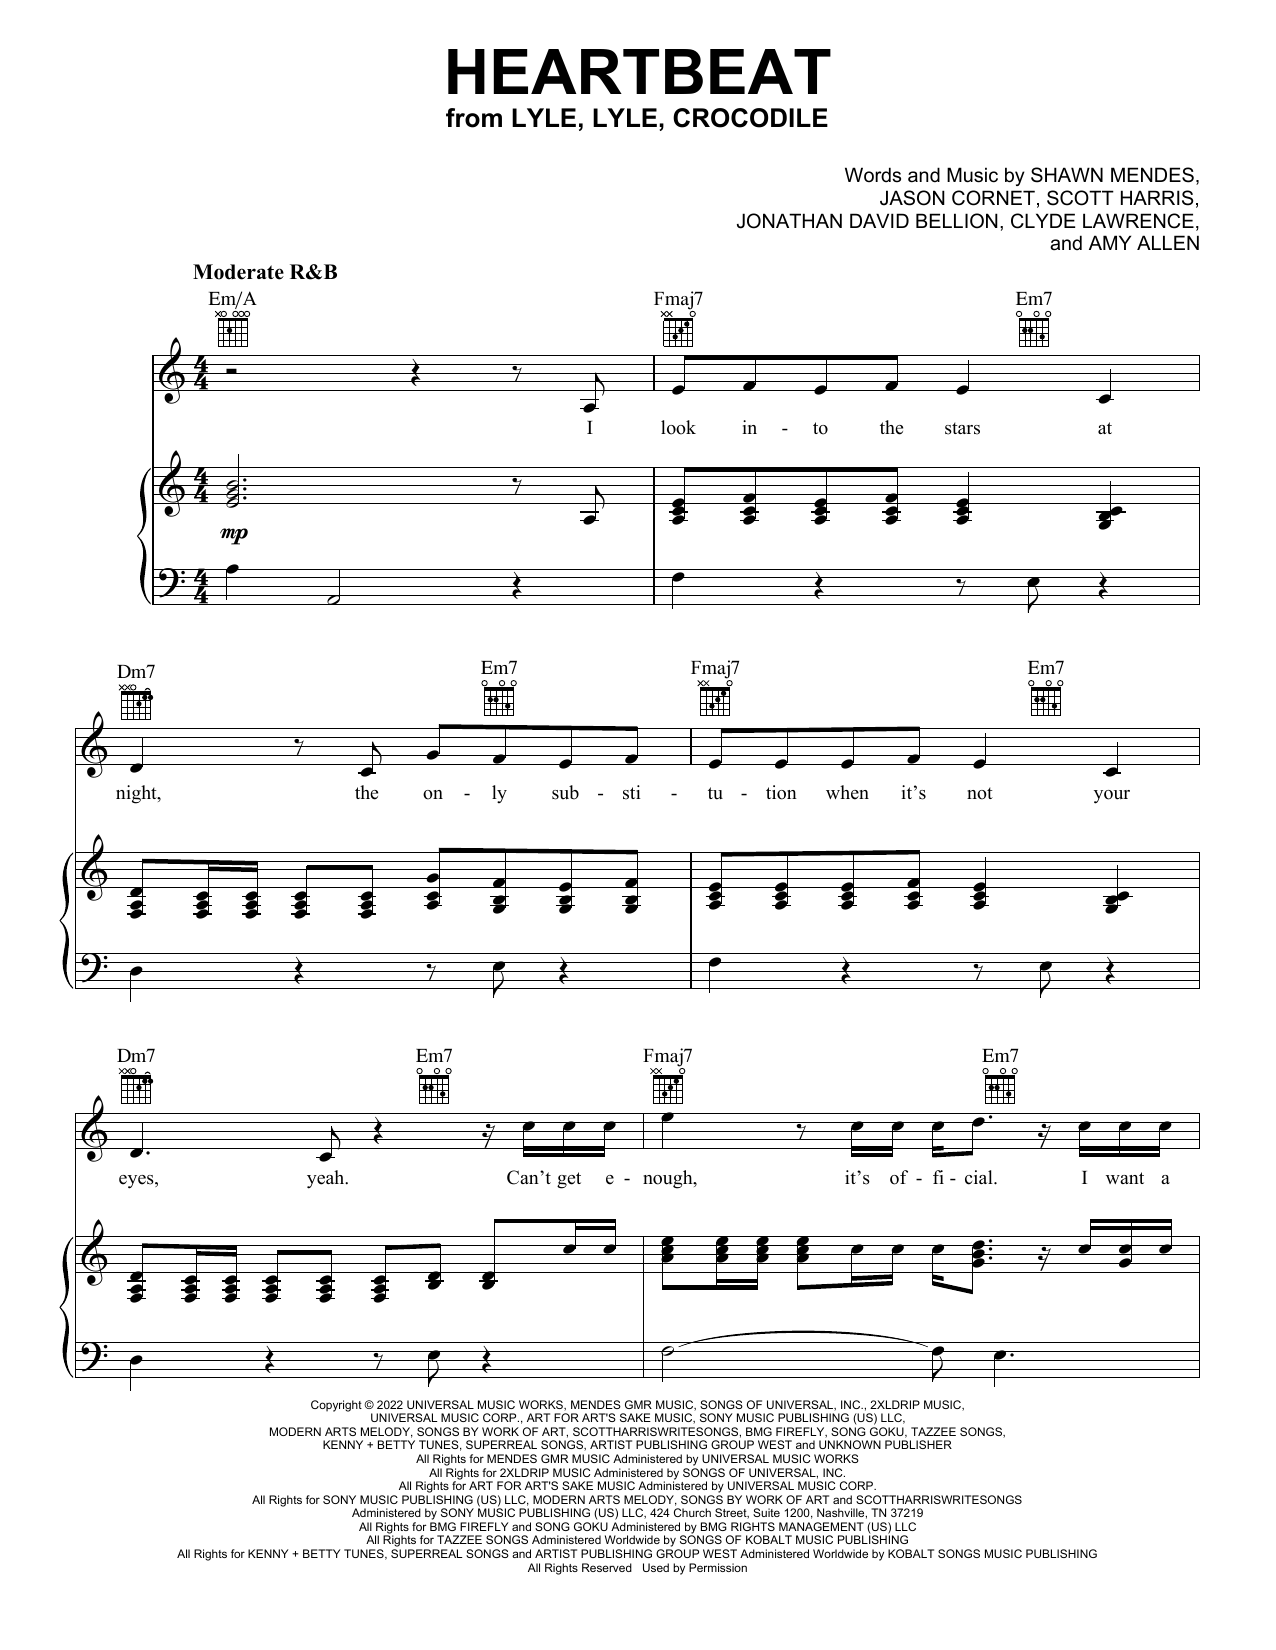 Download Shawn Mendes Heartbeat (from Lyle, Lyle, Crocodile) Sheet Music